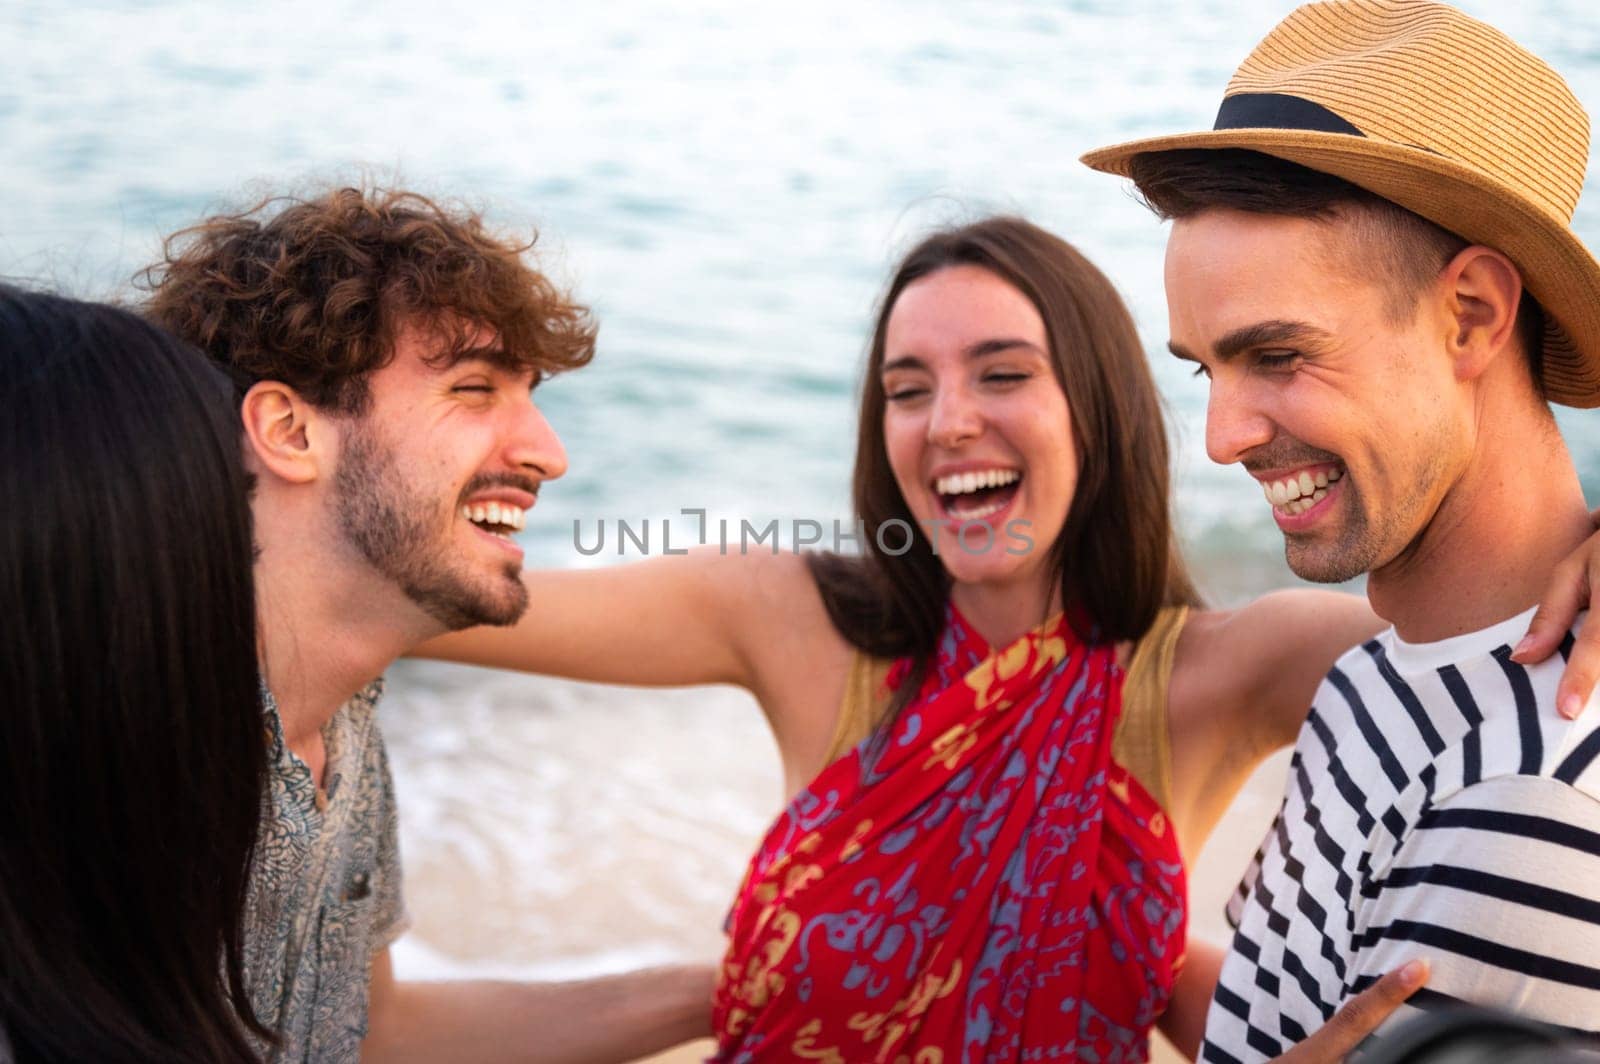 Group of friends laugh together embracing at the beach. Friendship and summer vacations. Lifestyle concept.